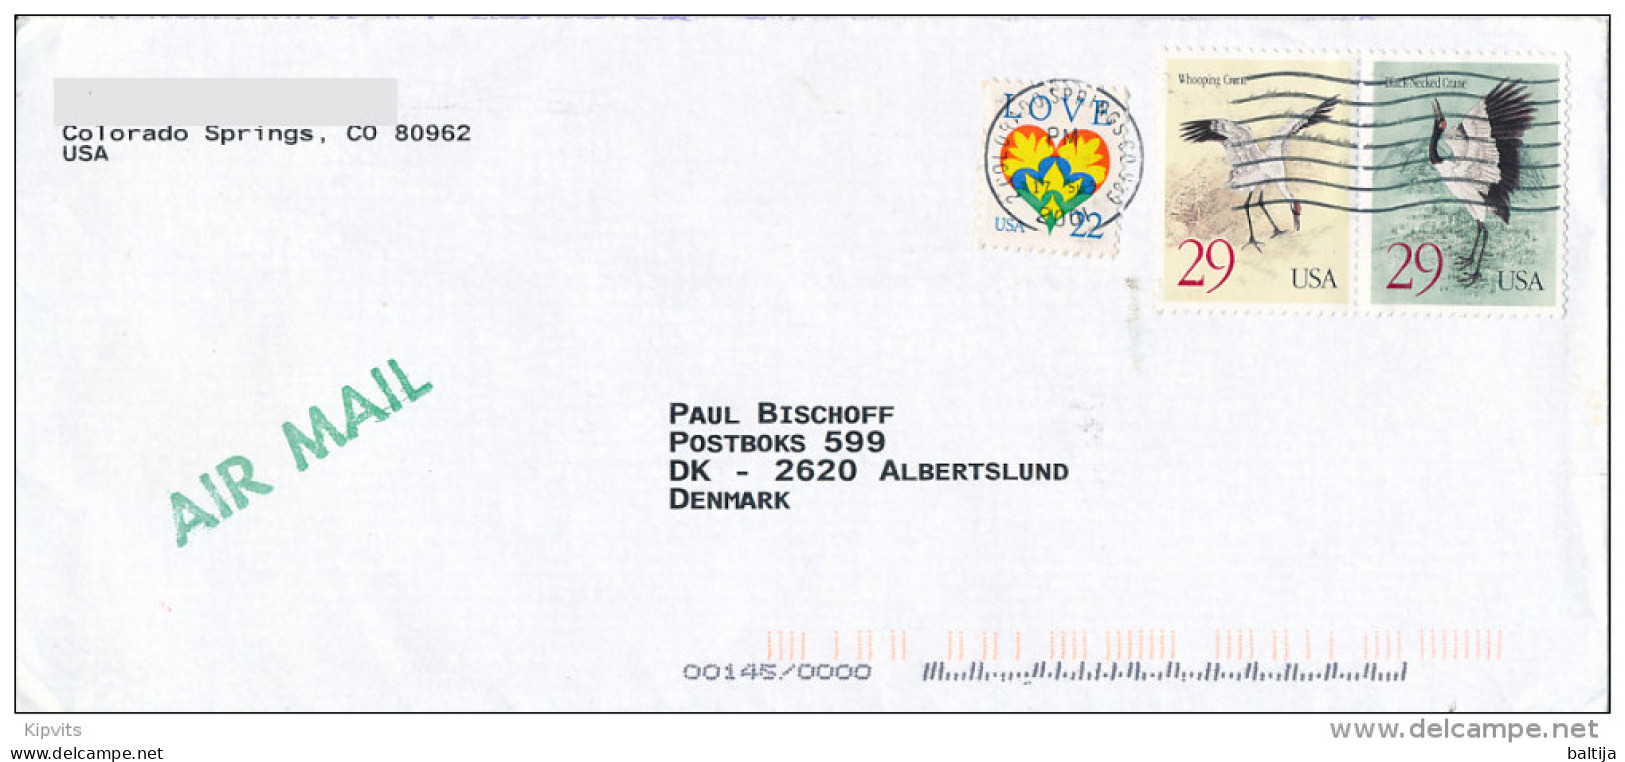 Airmail Cover Abroad / Joint Issue, China, Se-tenant, Crane - 17 September 2001 Colorado Springs CO 809 - Covers & Documents